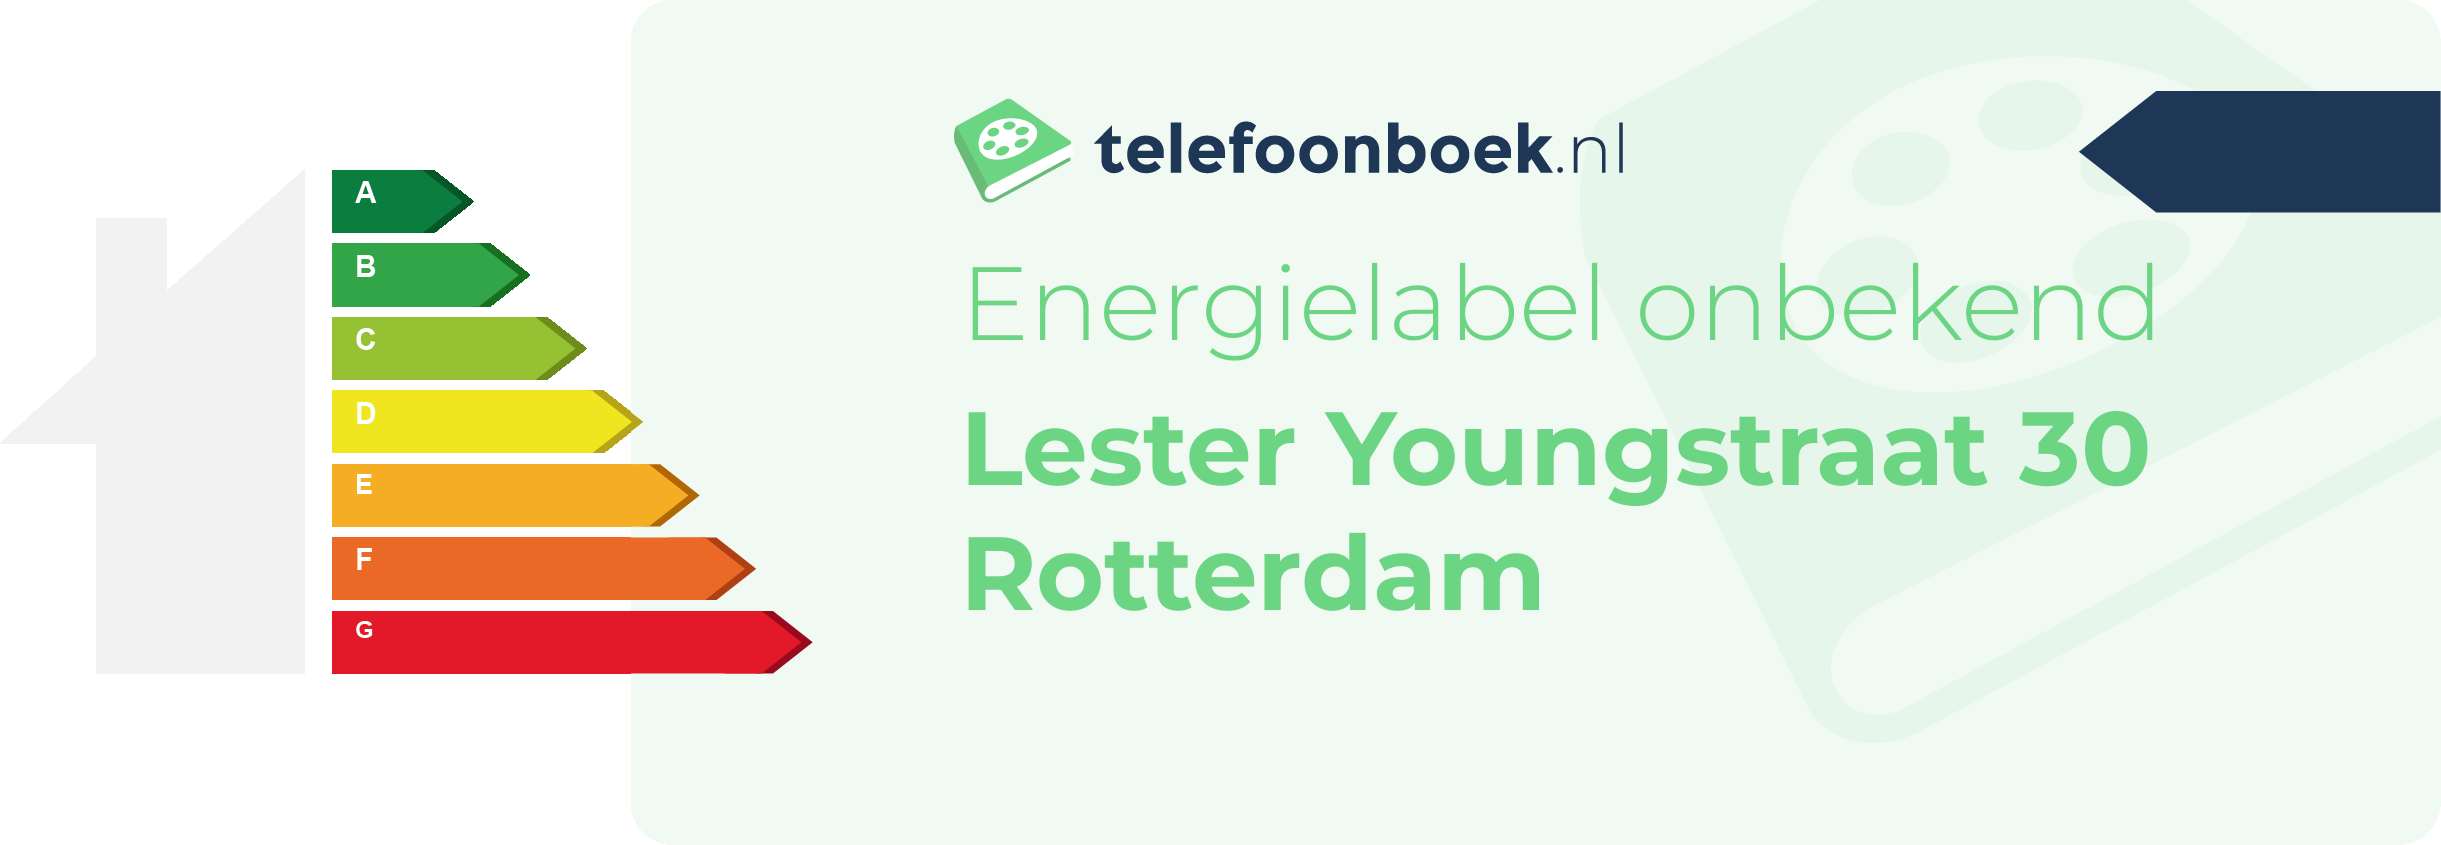 Energielabel Lester Youngstraat 30 Rotterdam